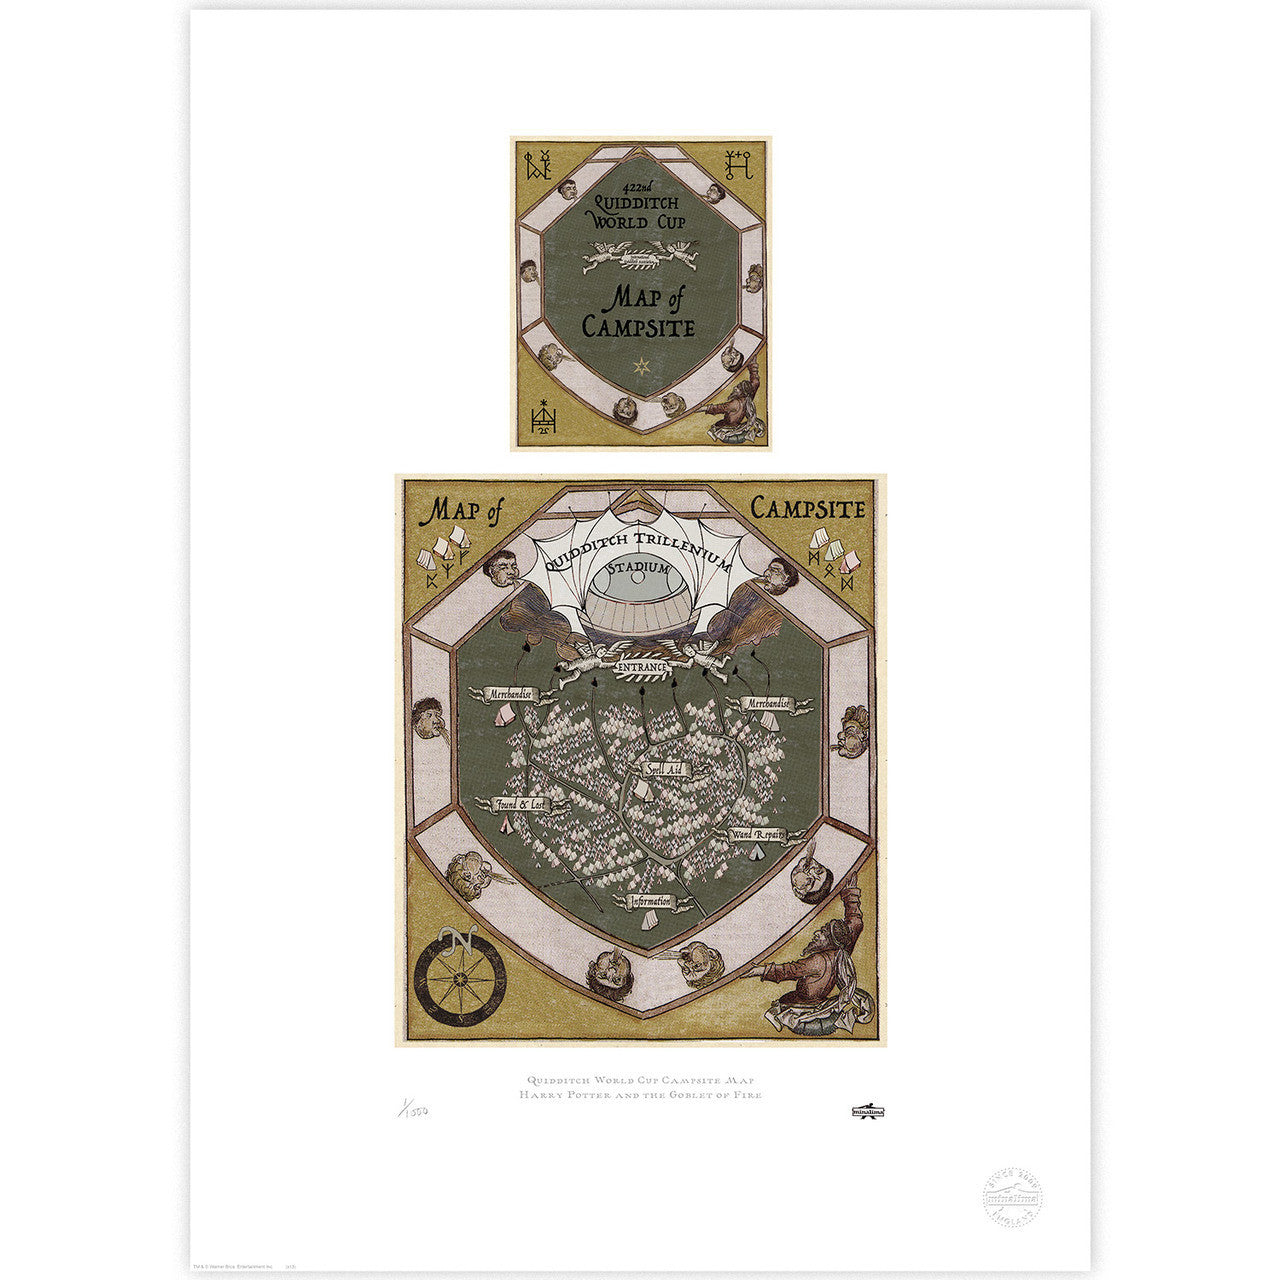 Quidditch World Cup Campsite Map Limited Edition Art Print